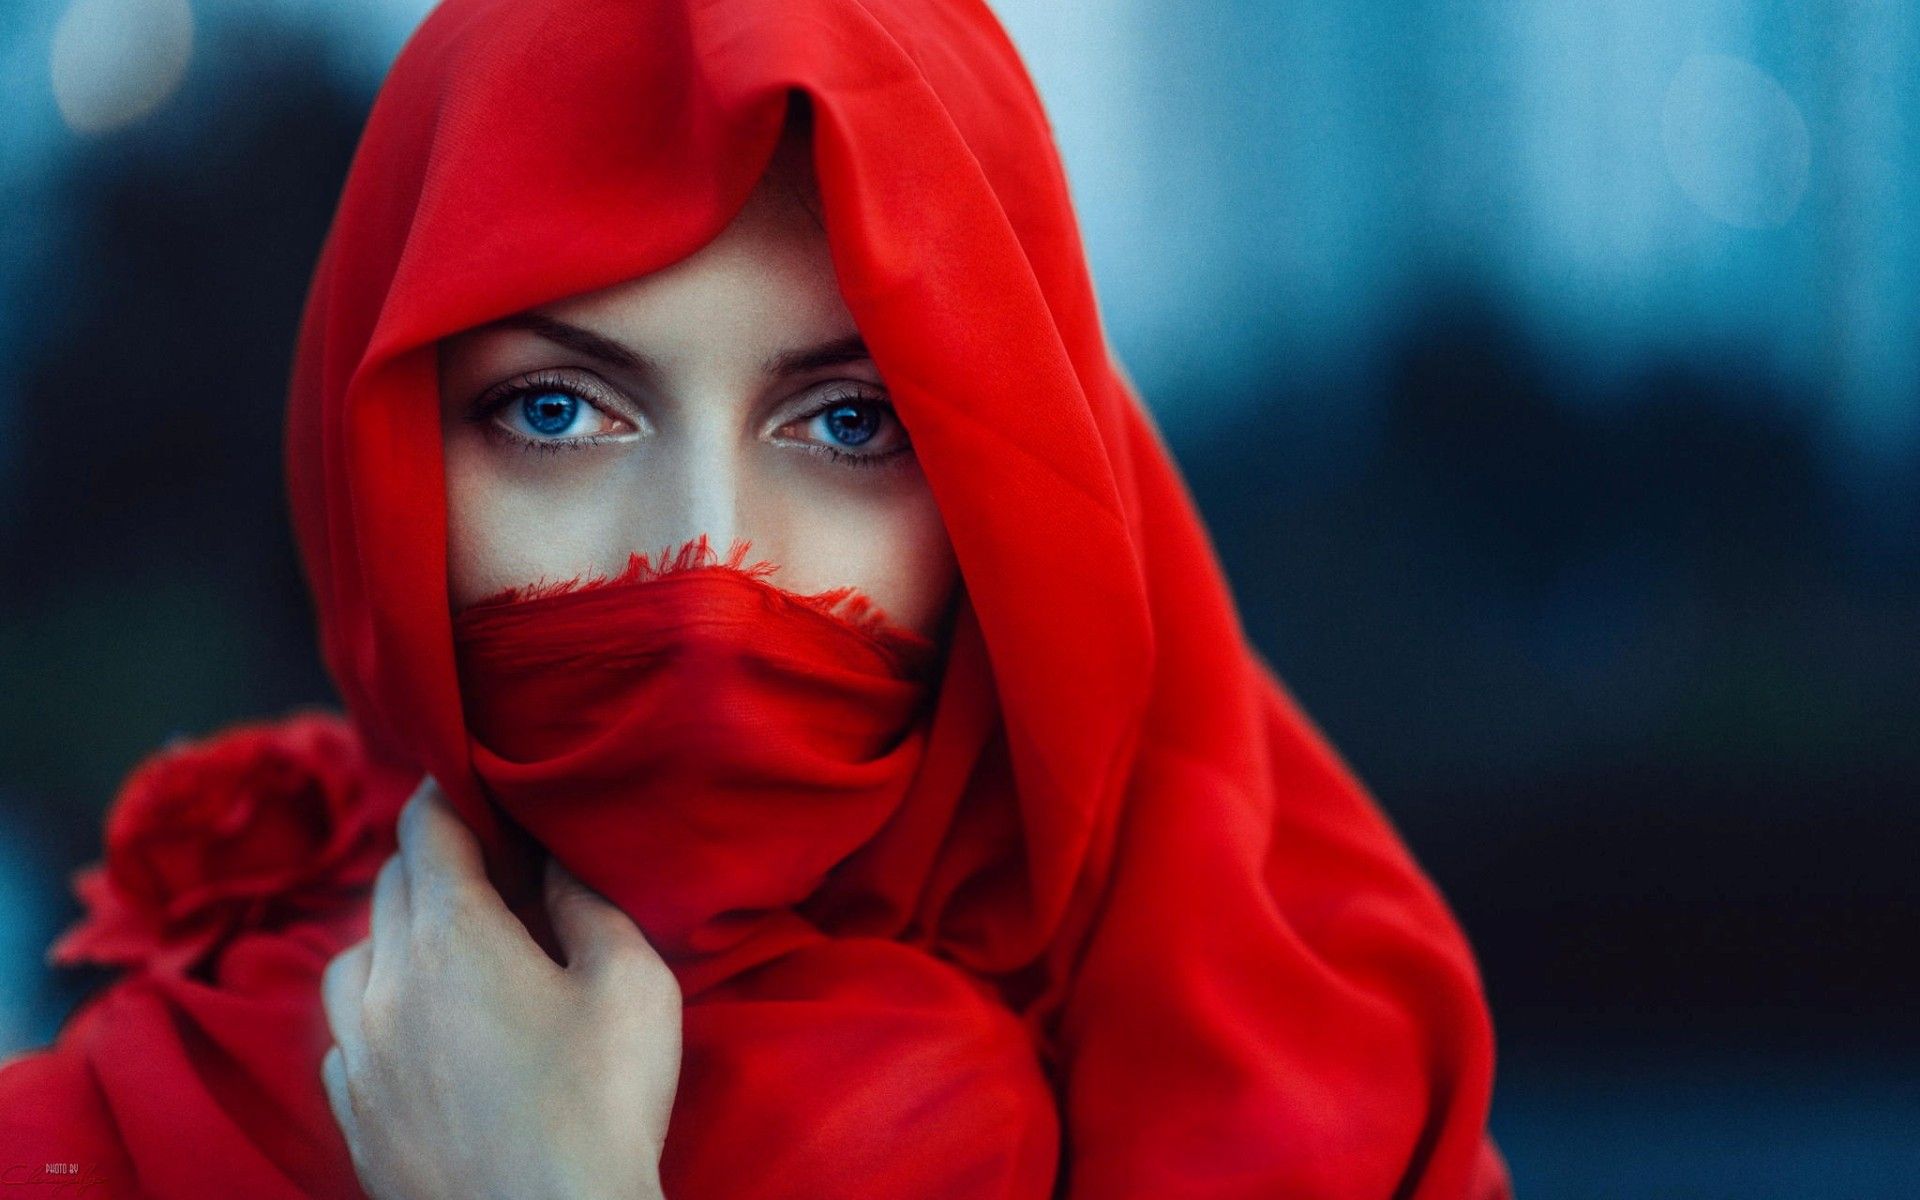 The girl in a red cape covering her face wallpaper and image